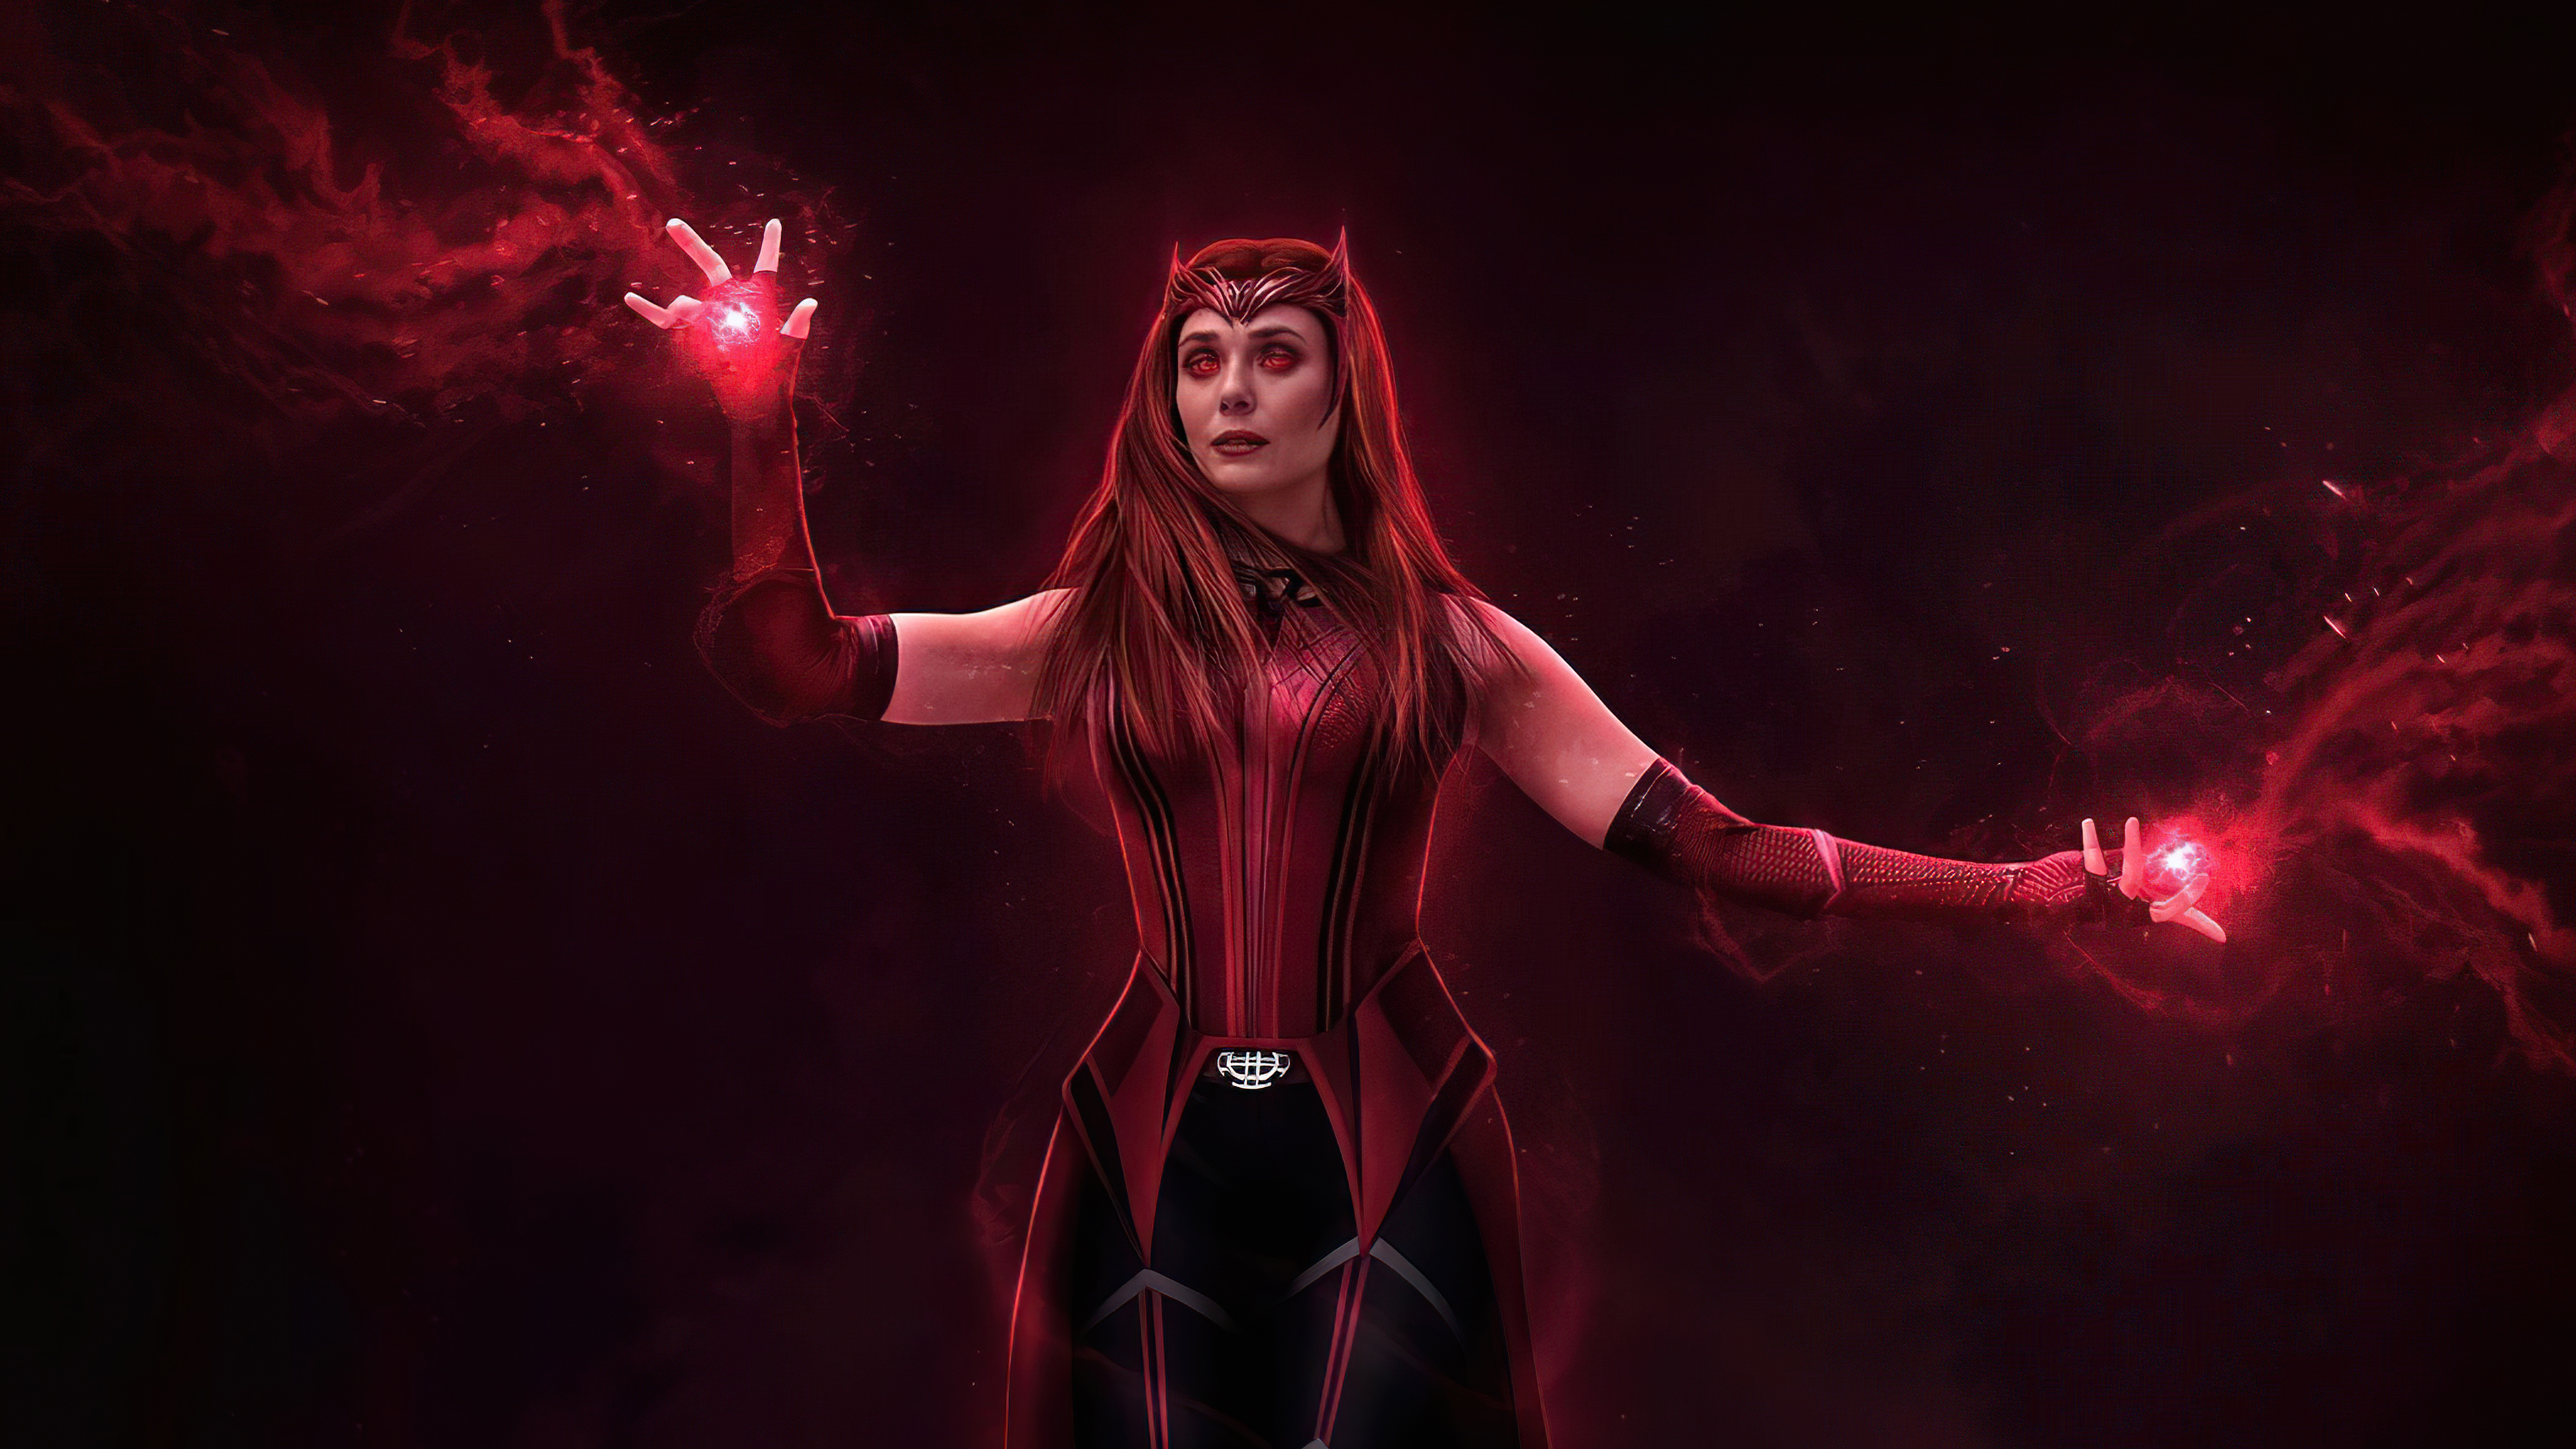 Scarlet Witch Switched Back 4k, HD Tv Shows, 4k Wallpapers, Image, Backgrou...